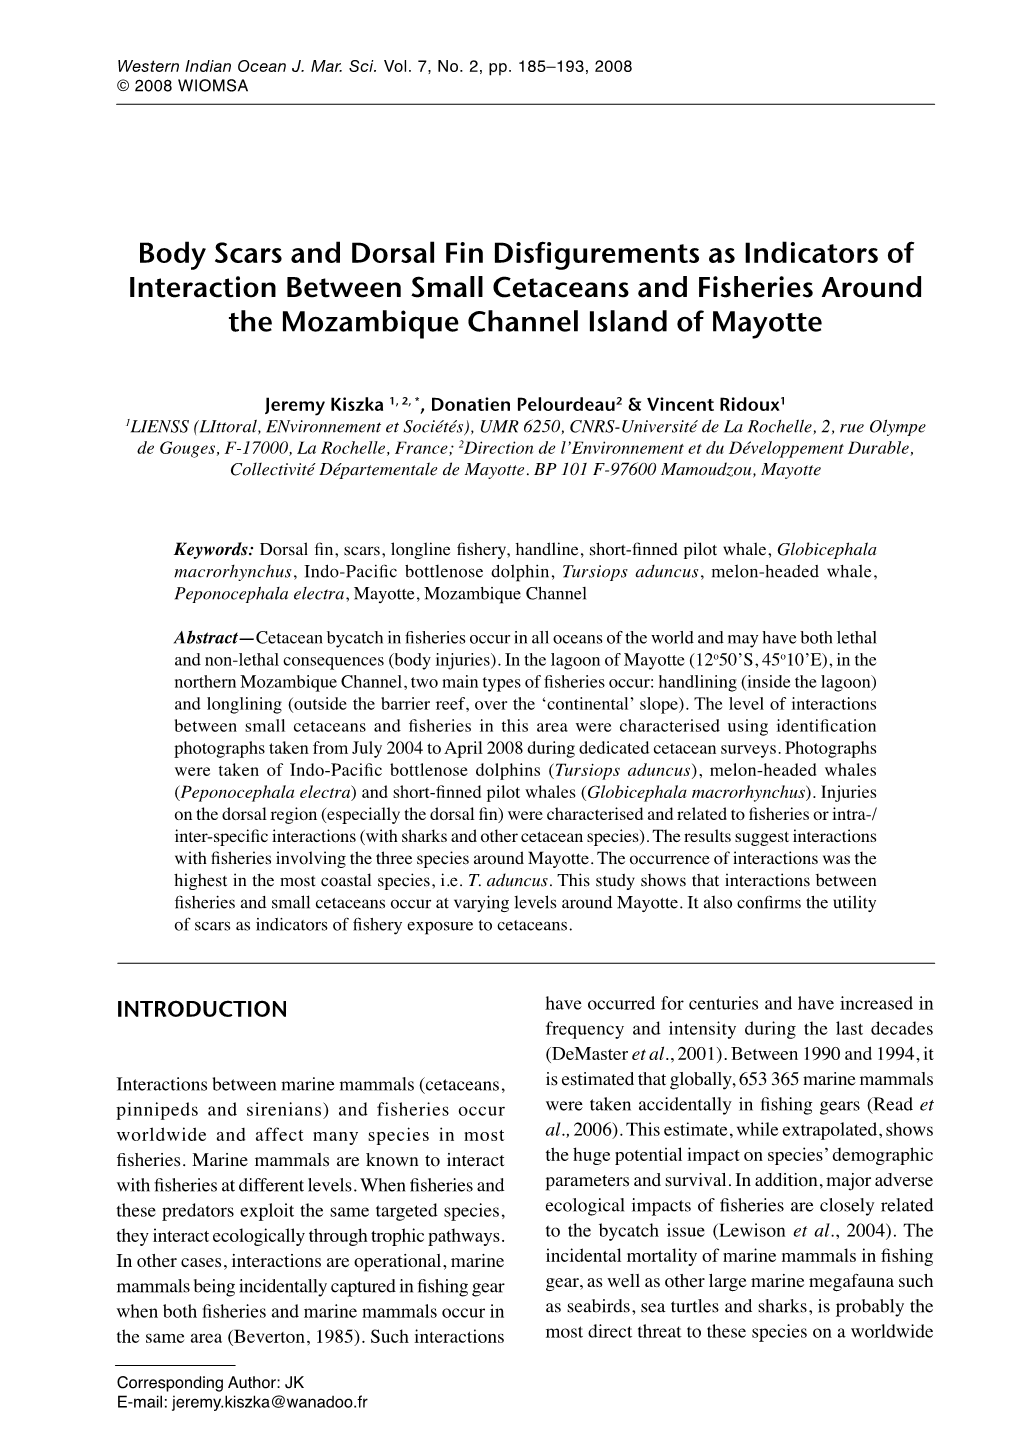 Body Scars and Dorsal Fin Disfigurements As Indicators of Interaction Between Small Cetaceans and Fisheries Around the Mozambique Channel Island of Mayotte